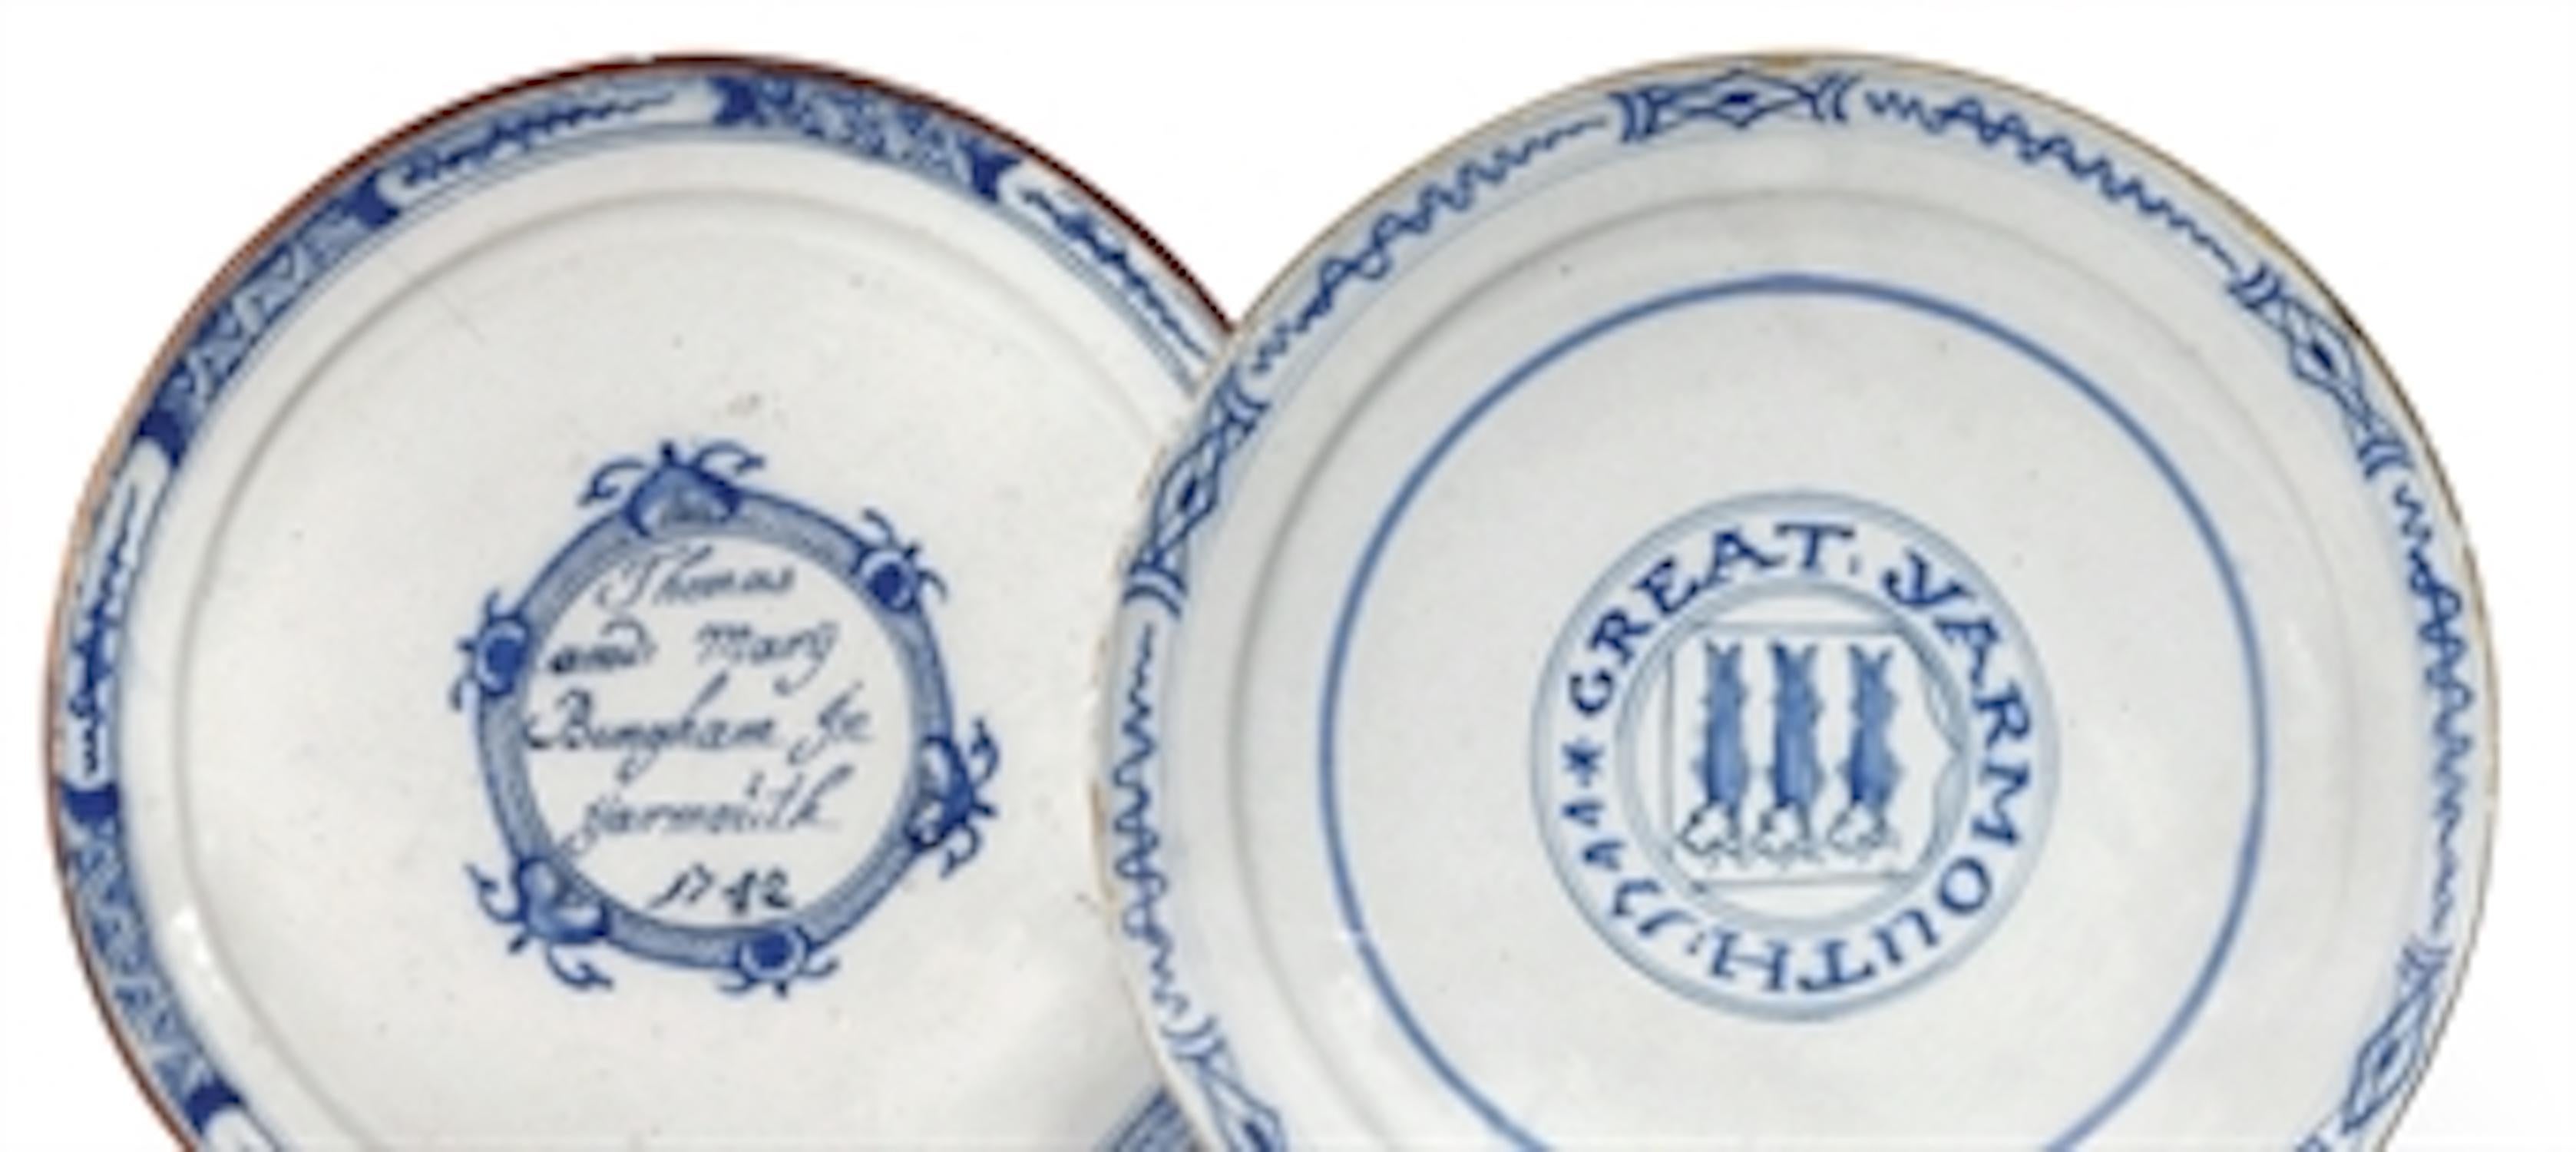 Hand-Painted Plate, Delftware, 1742, Dutch, Thomas and Mary Bingham, Yarmouth, 1742, Suffolk For Sale